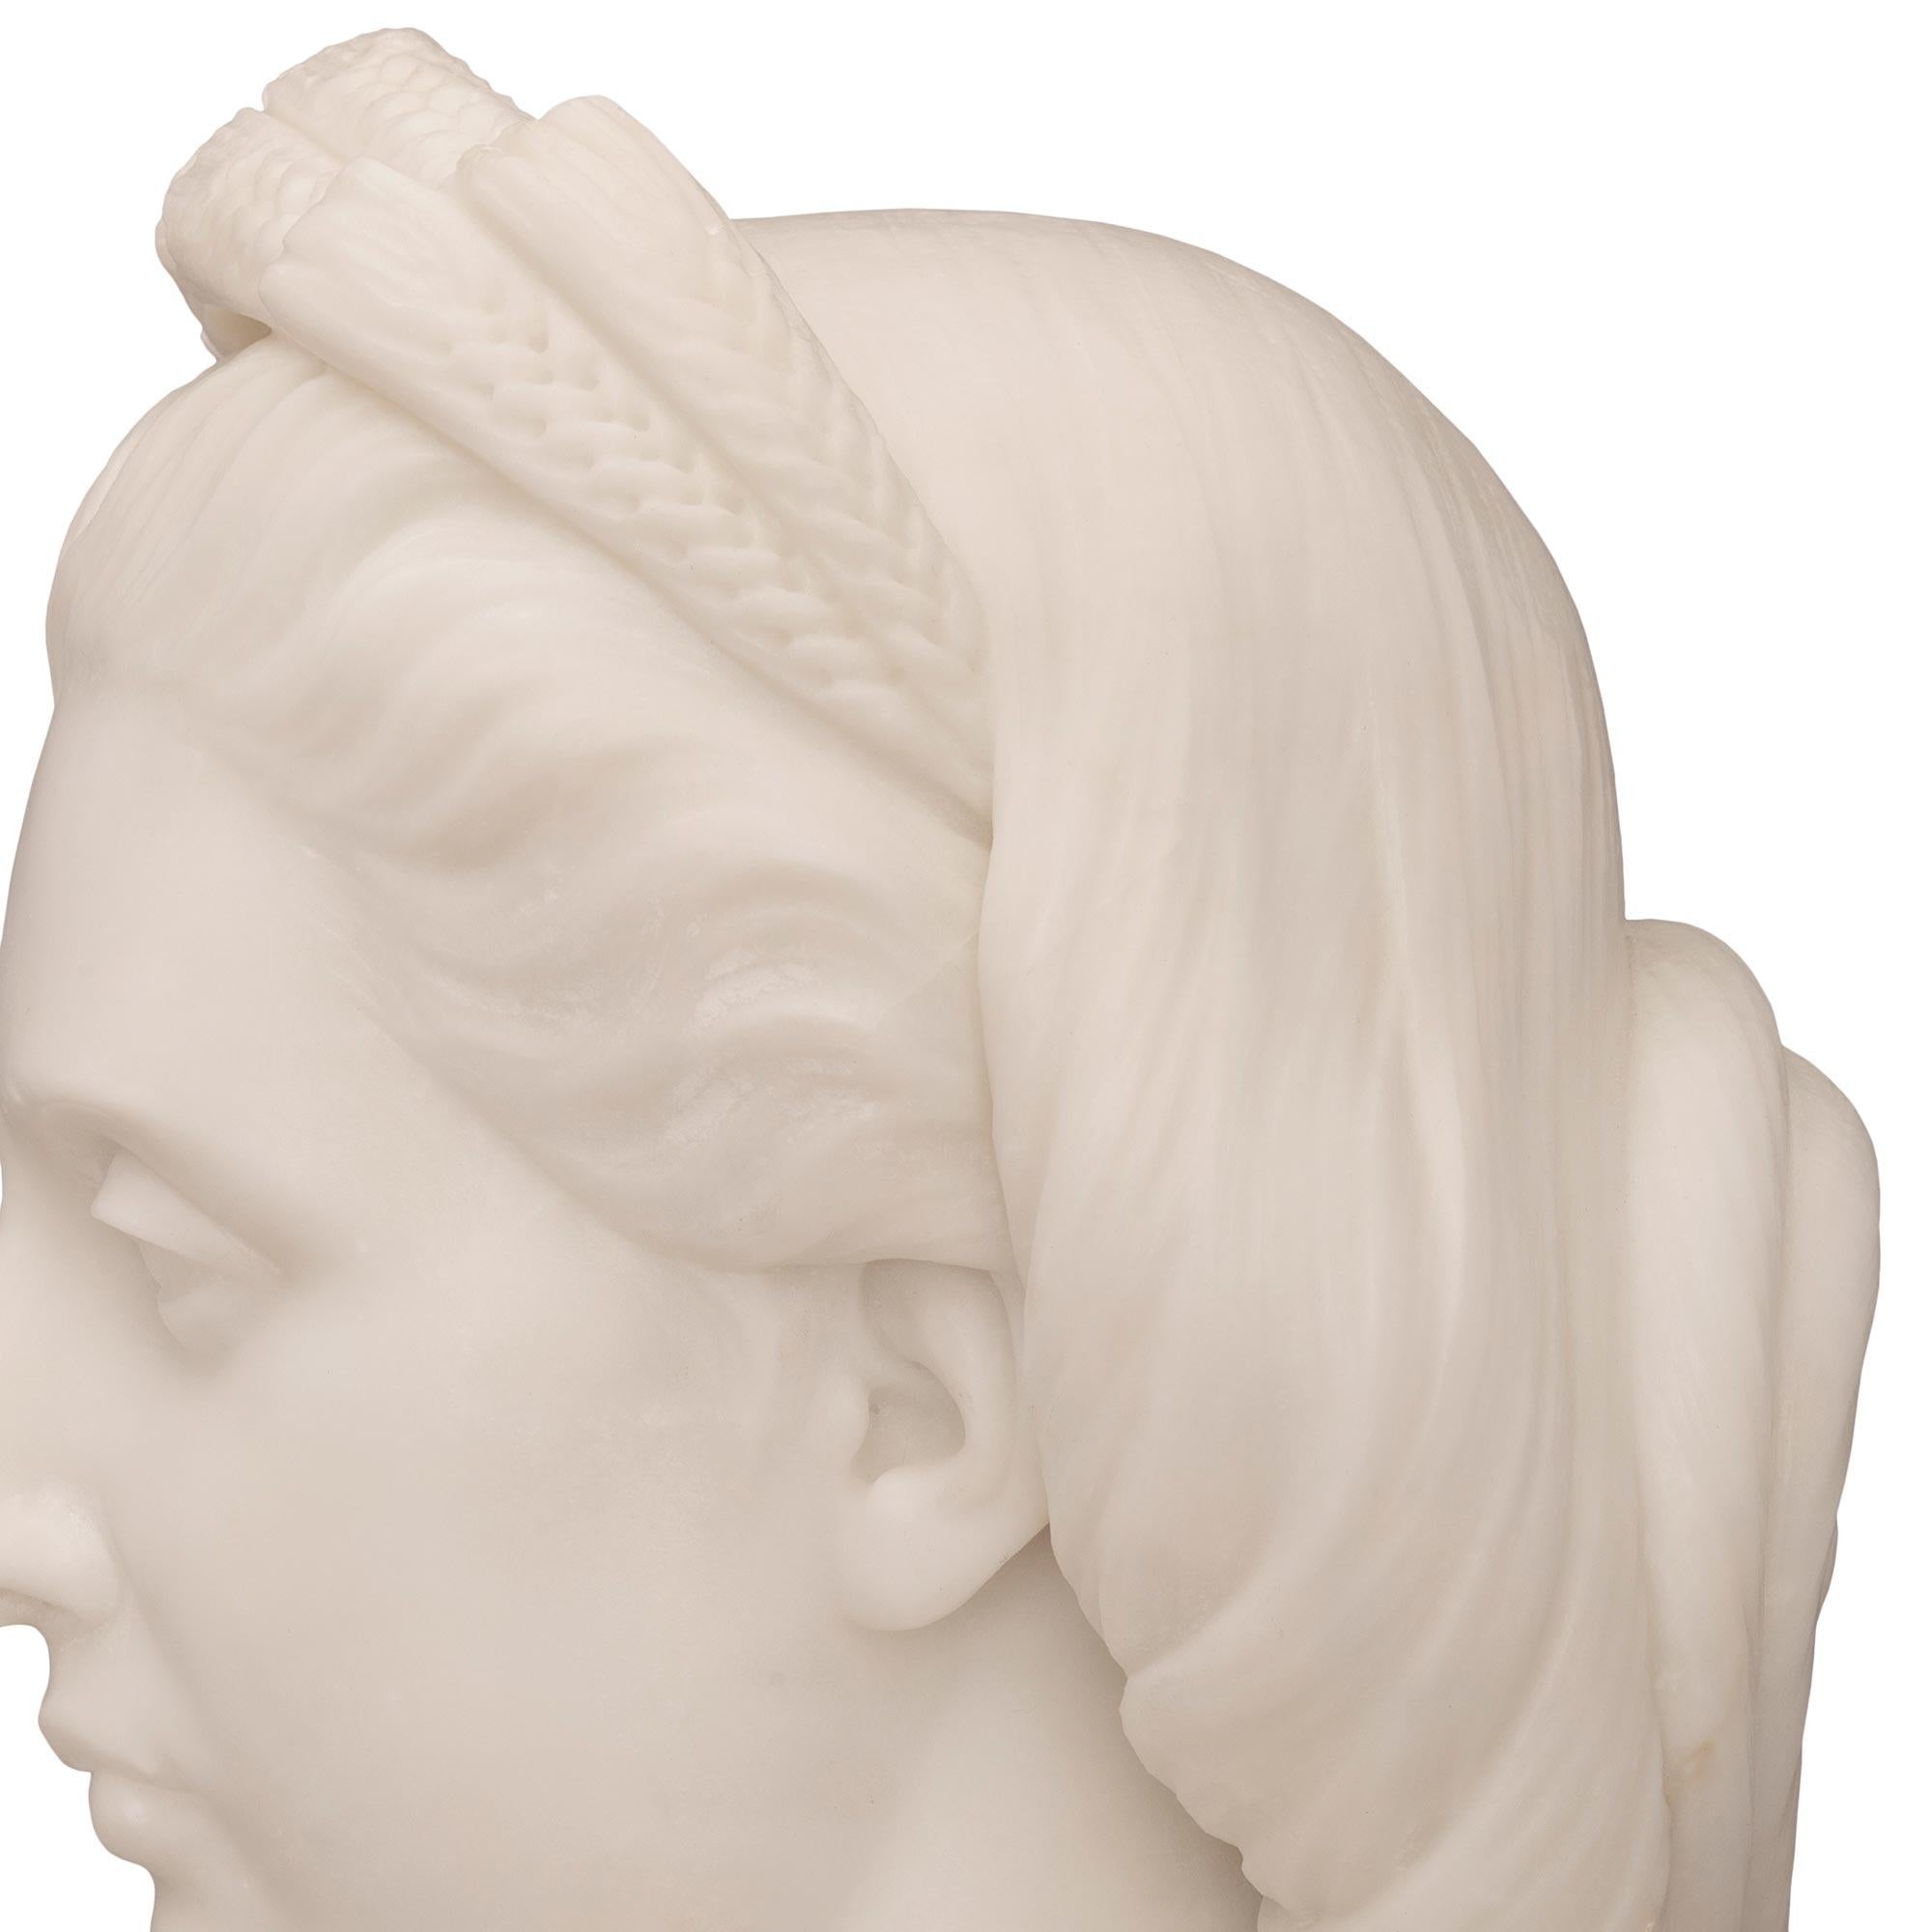 French 19th Century White Carrara Marble Bust Signed Paul Aubé, 1864 For Sale 3